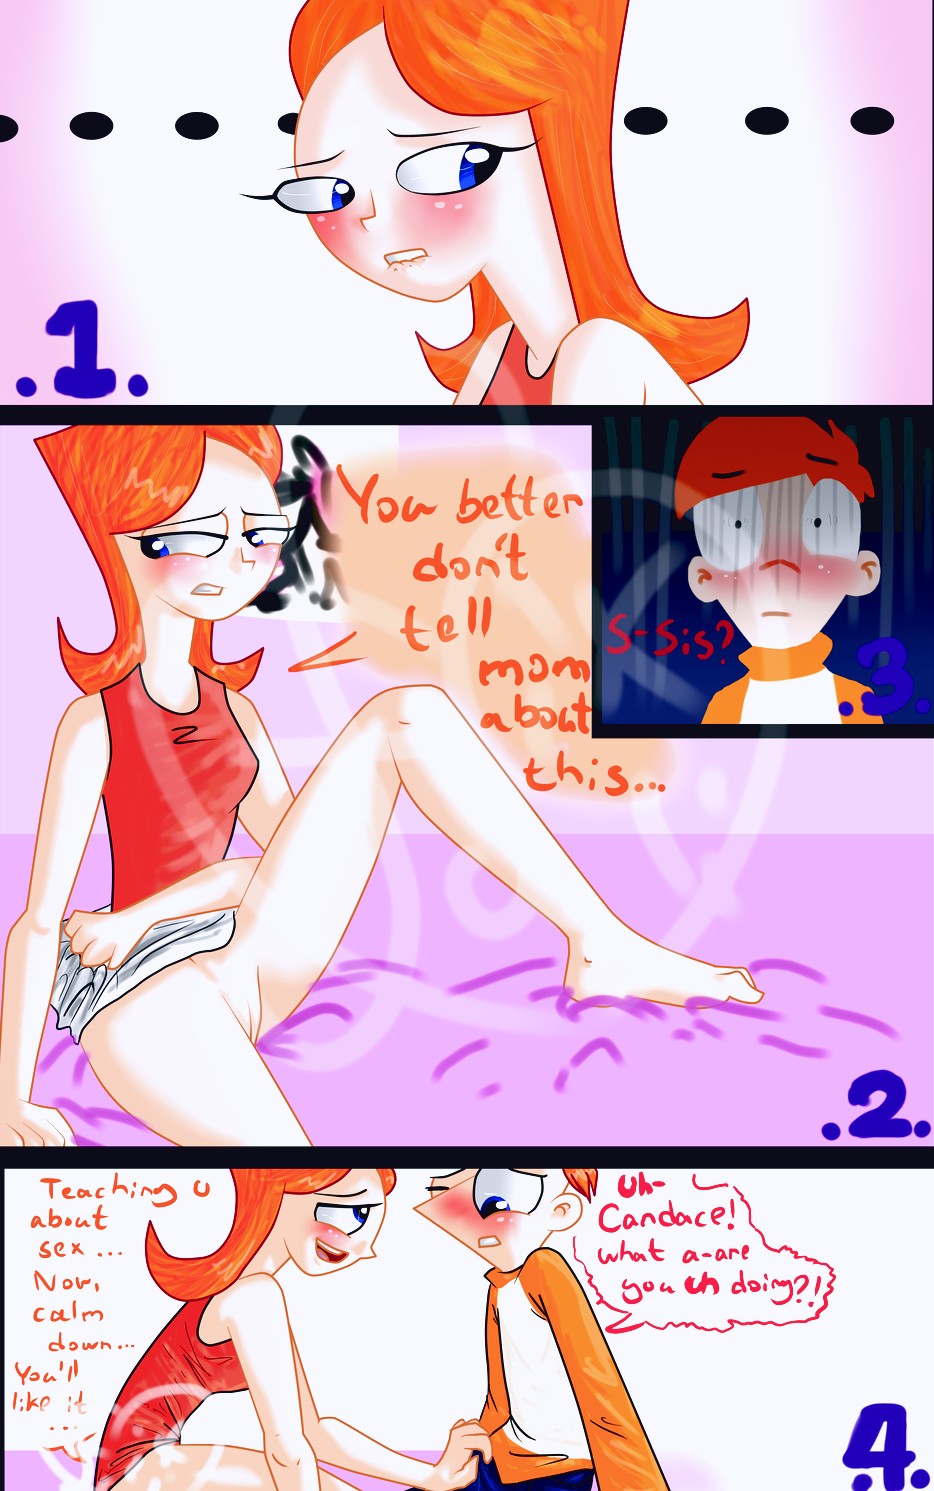 Und sex candace phineas ferb Phineas And